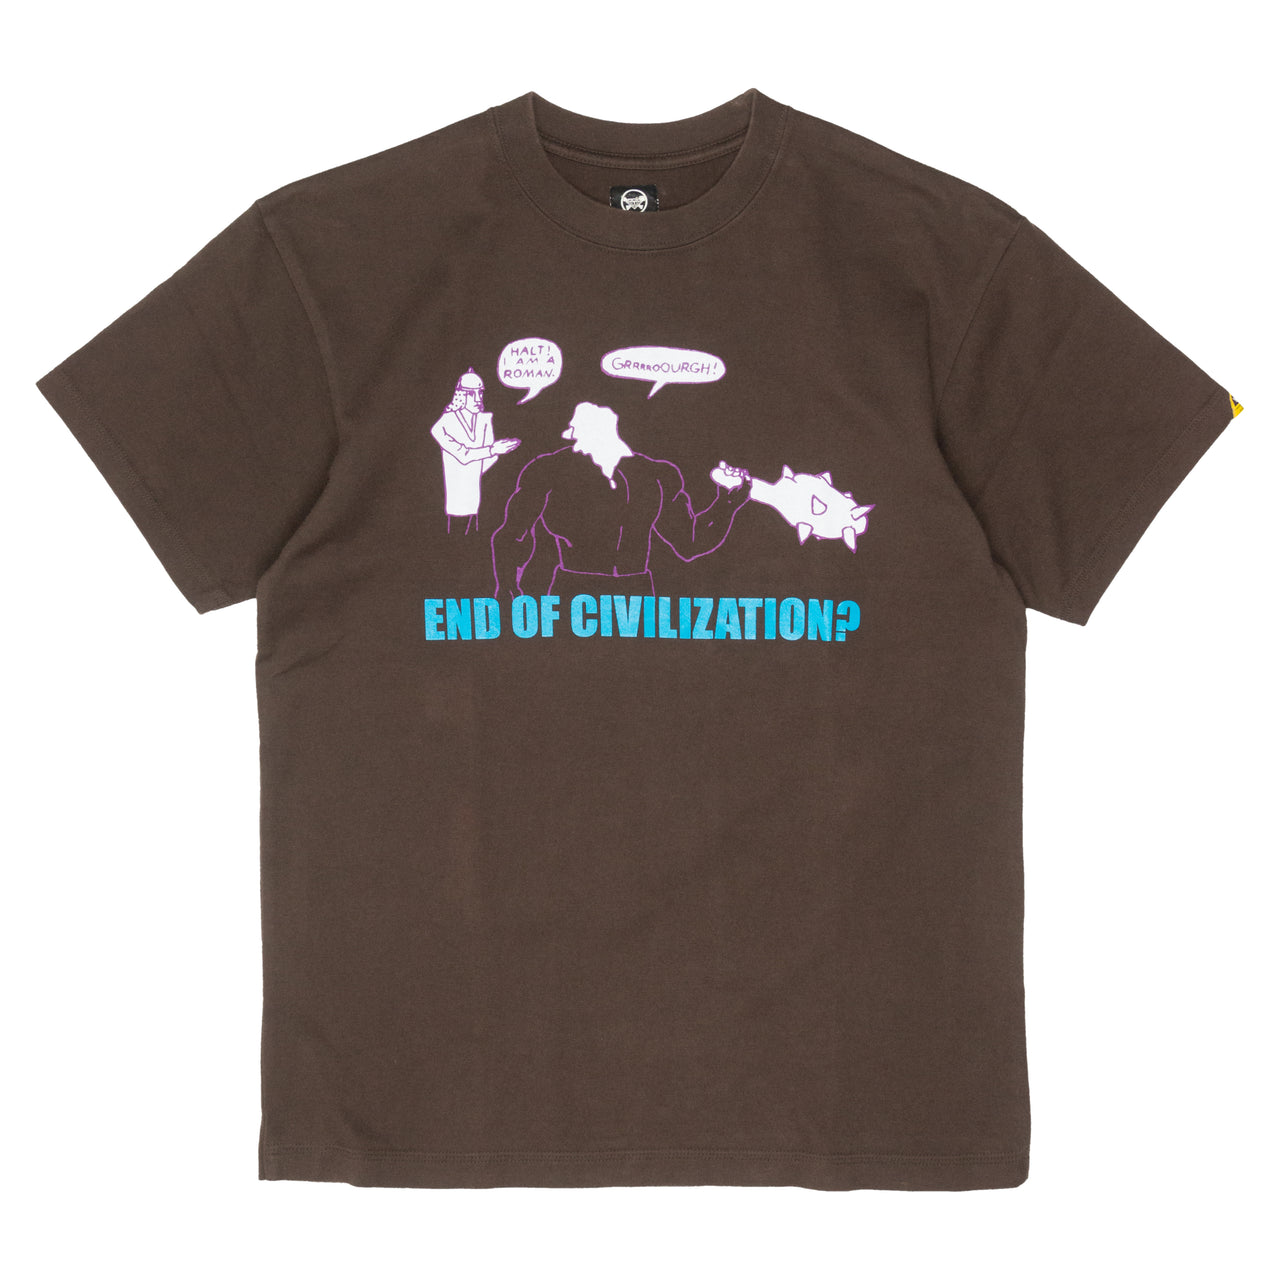 Undercover "End of Civilization?" Tee - AW01 - "D.A.V.F."